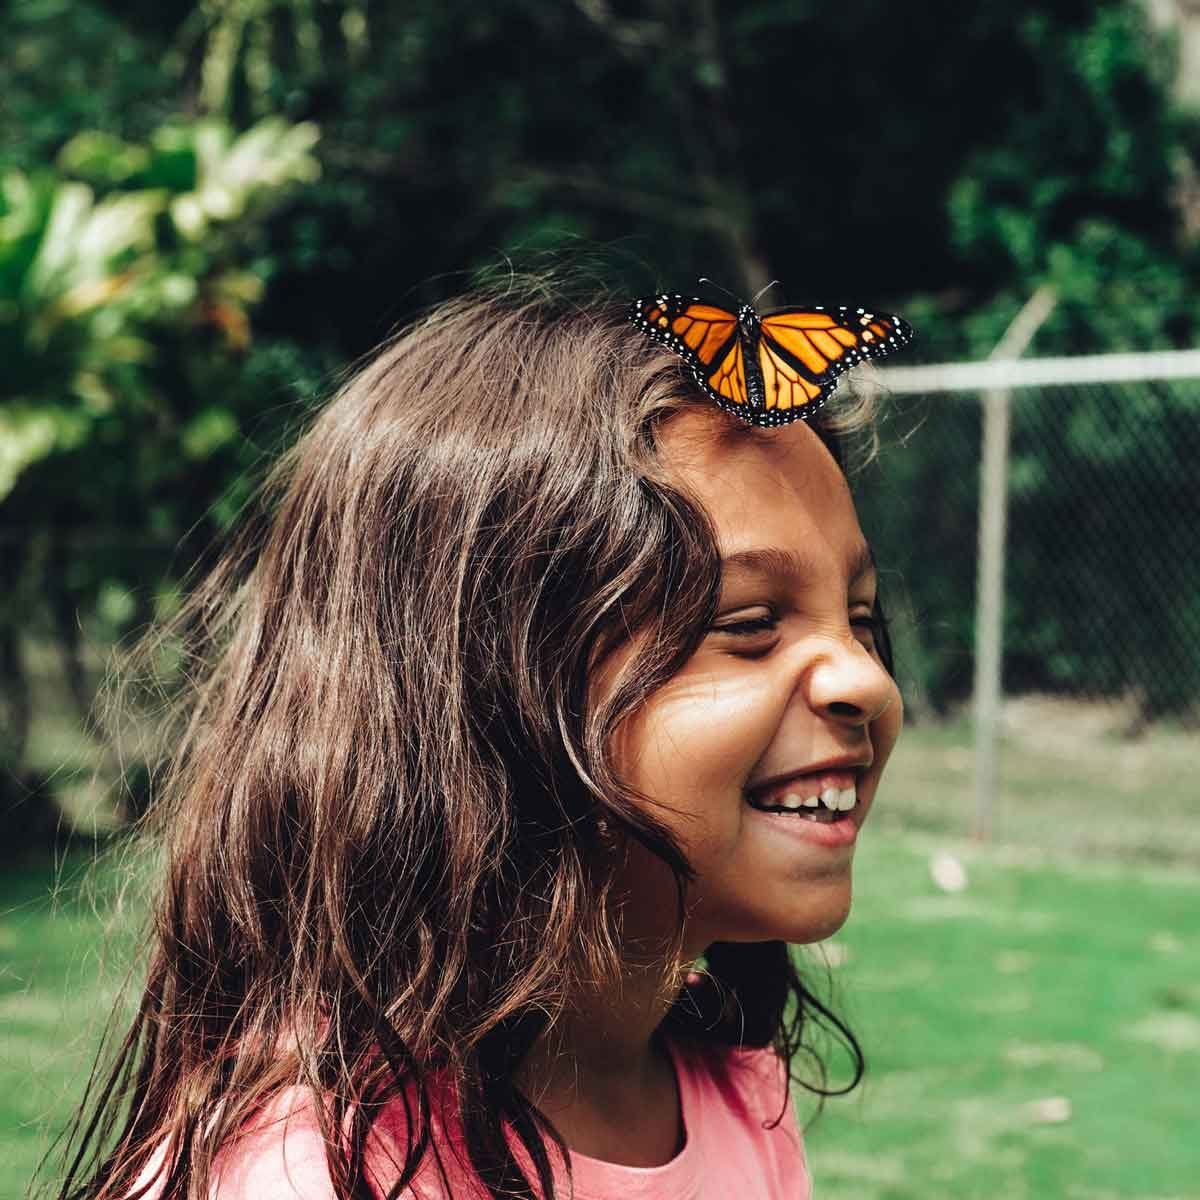 7 Tips for Attracting Butterflies to Your Backyard